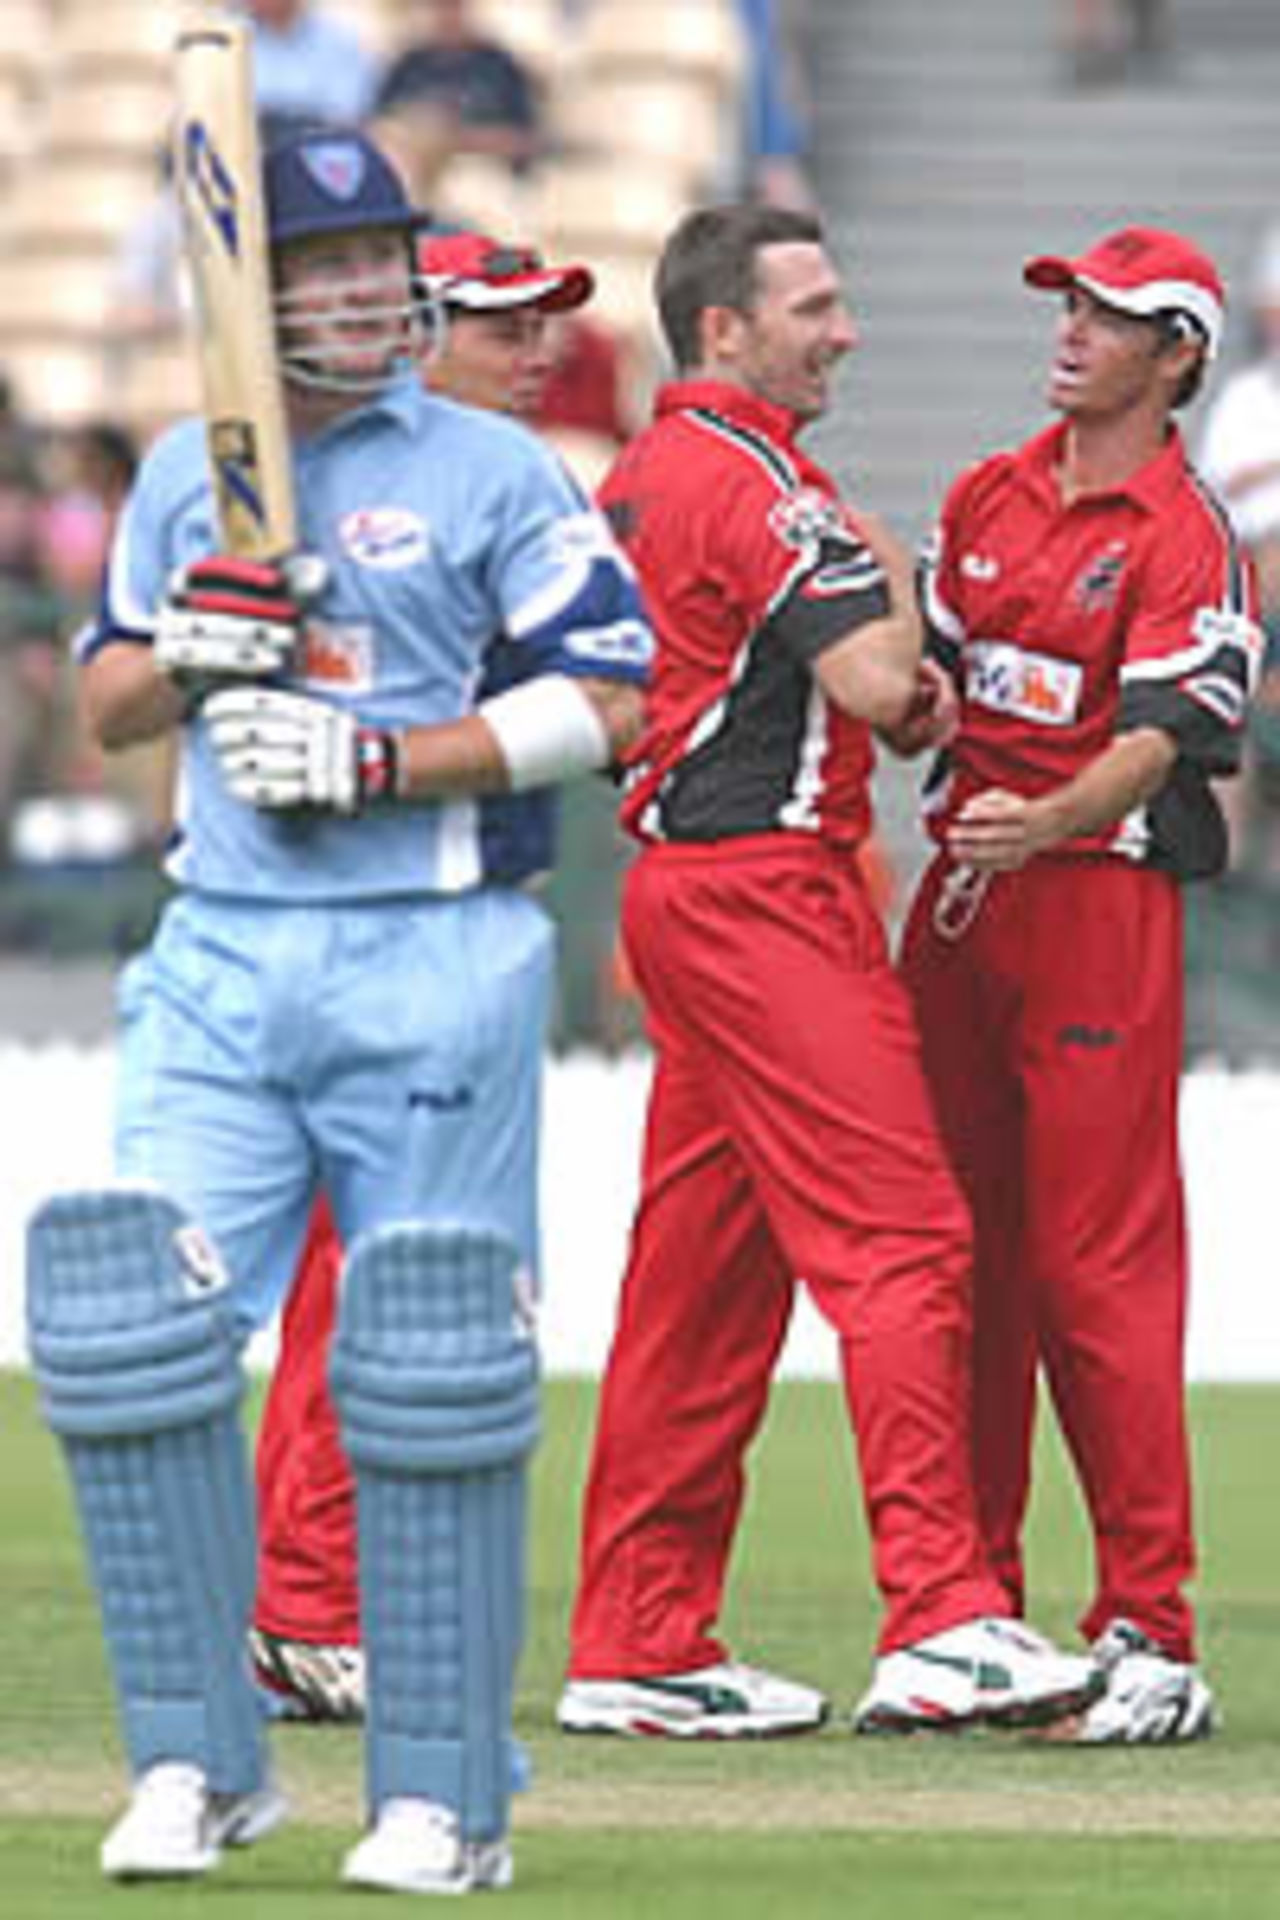 ADELAIDE - NOVEMBER 2: Damien Fleming is congratulated by Greg Blewett and Darren Lehmann after he bowled Michael Clarke for 48 during the ING Cup match between the South Australian Redbacks and New South Wales Blues played at Adelaide Oval in Adelaide, Australia on November 2, 2002.